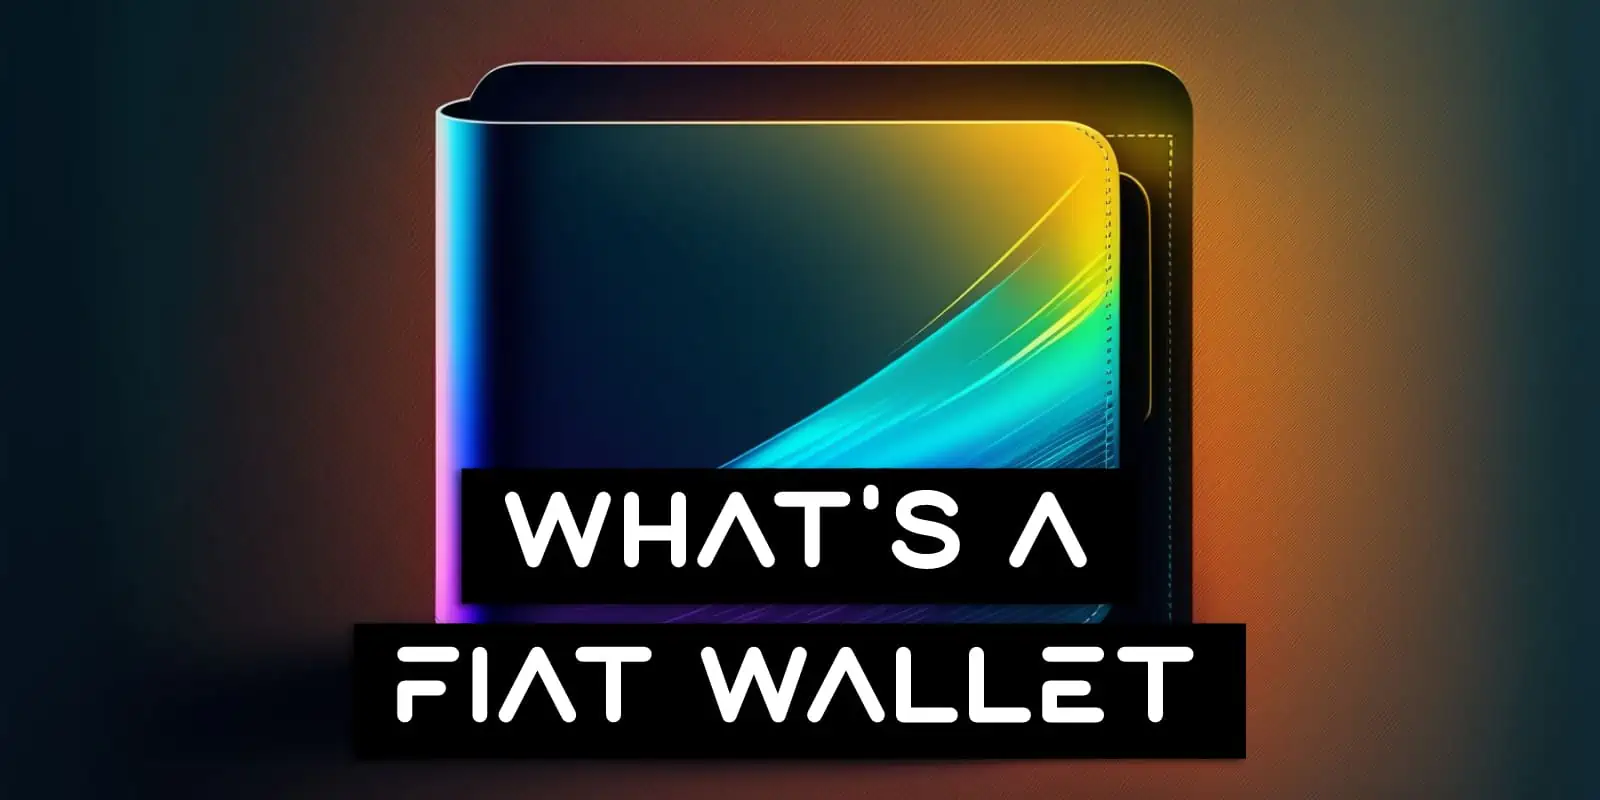 What Is A Fiat Wallet